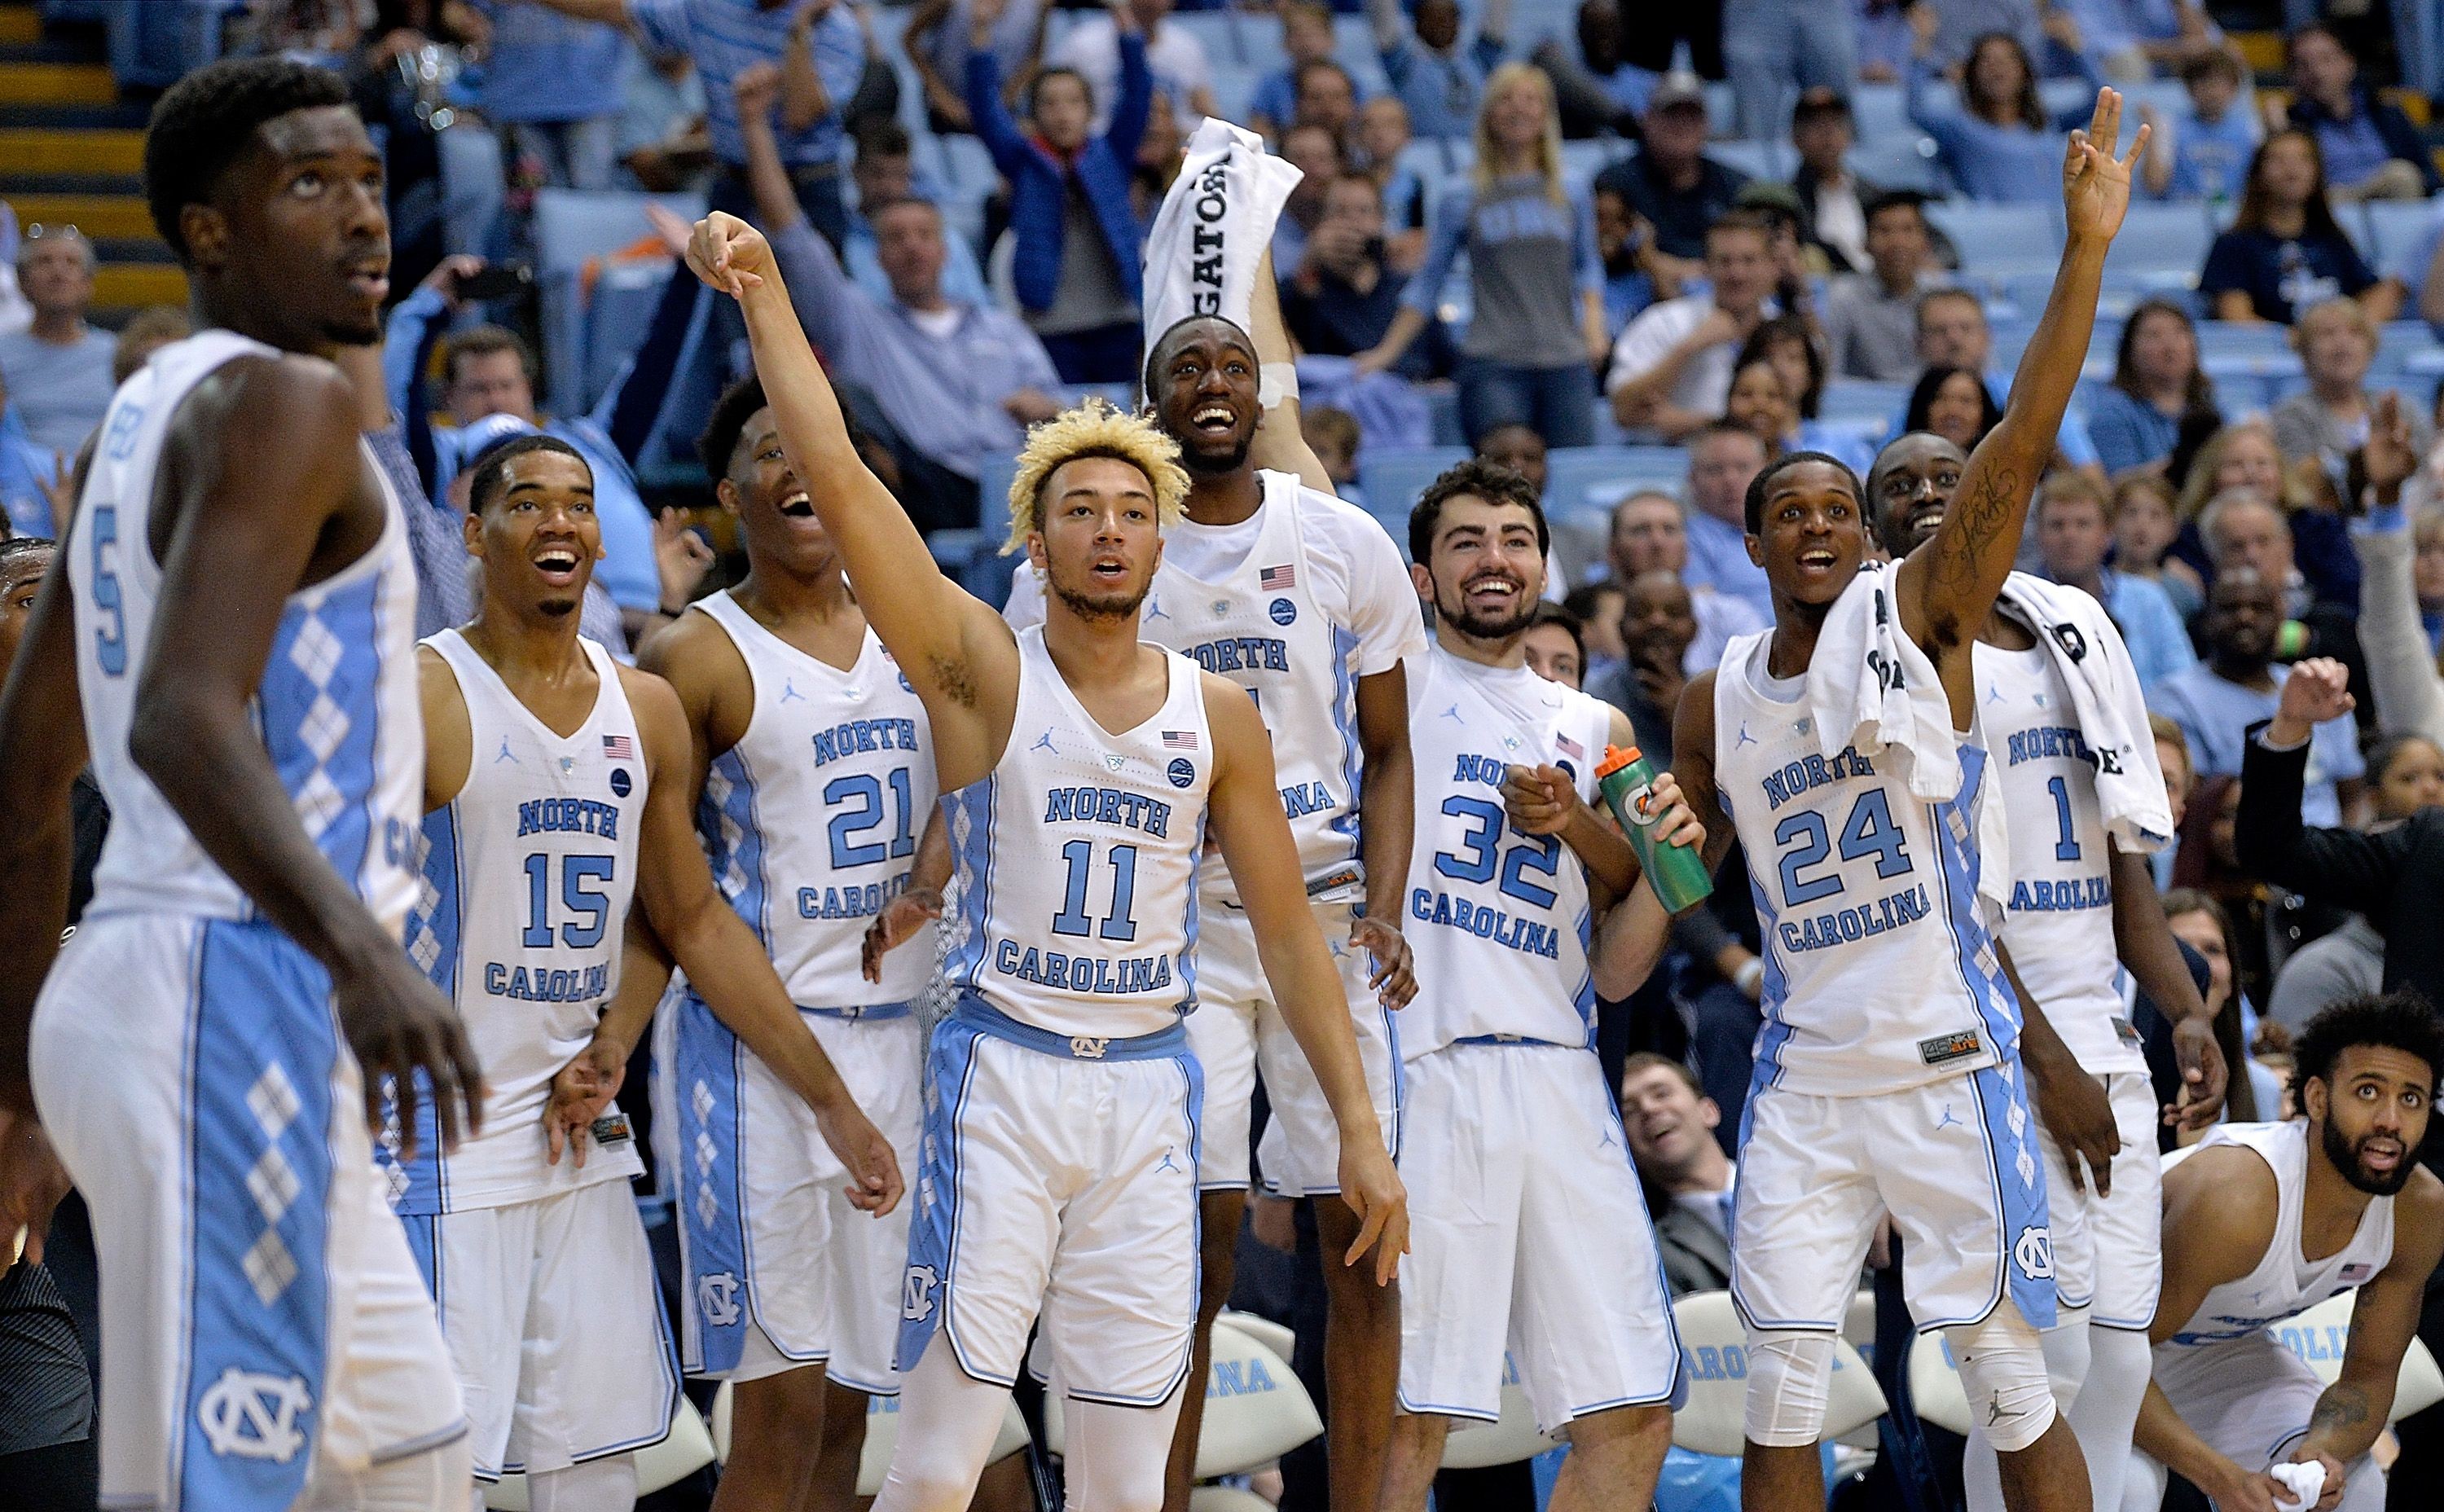 UNC Basketball Tar Heels blow past Tulane in Chapel Hill